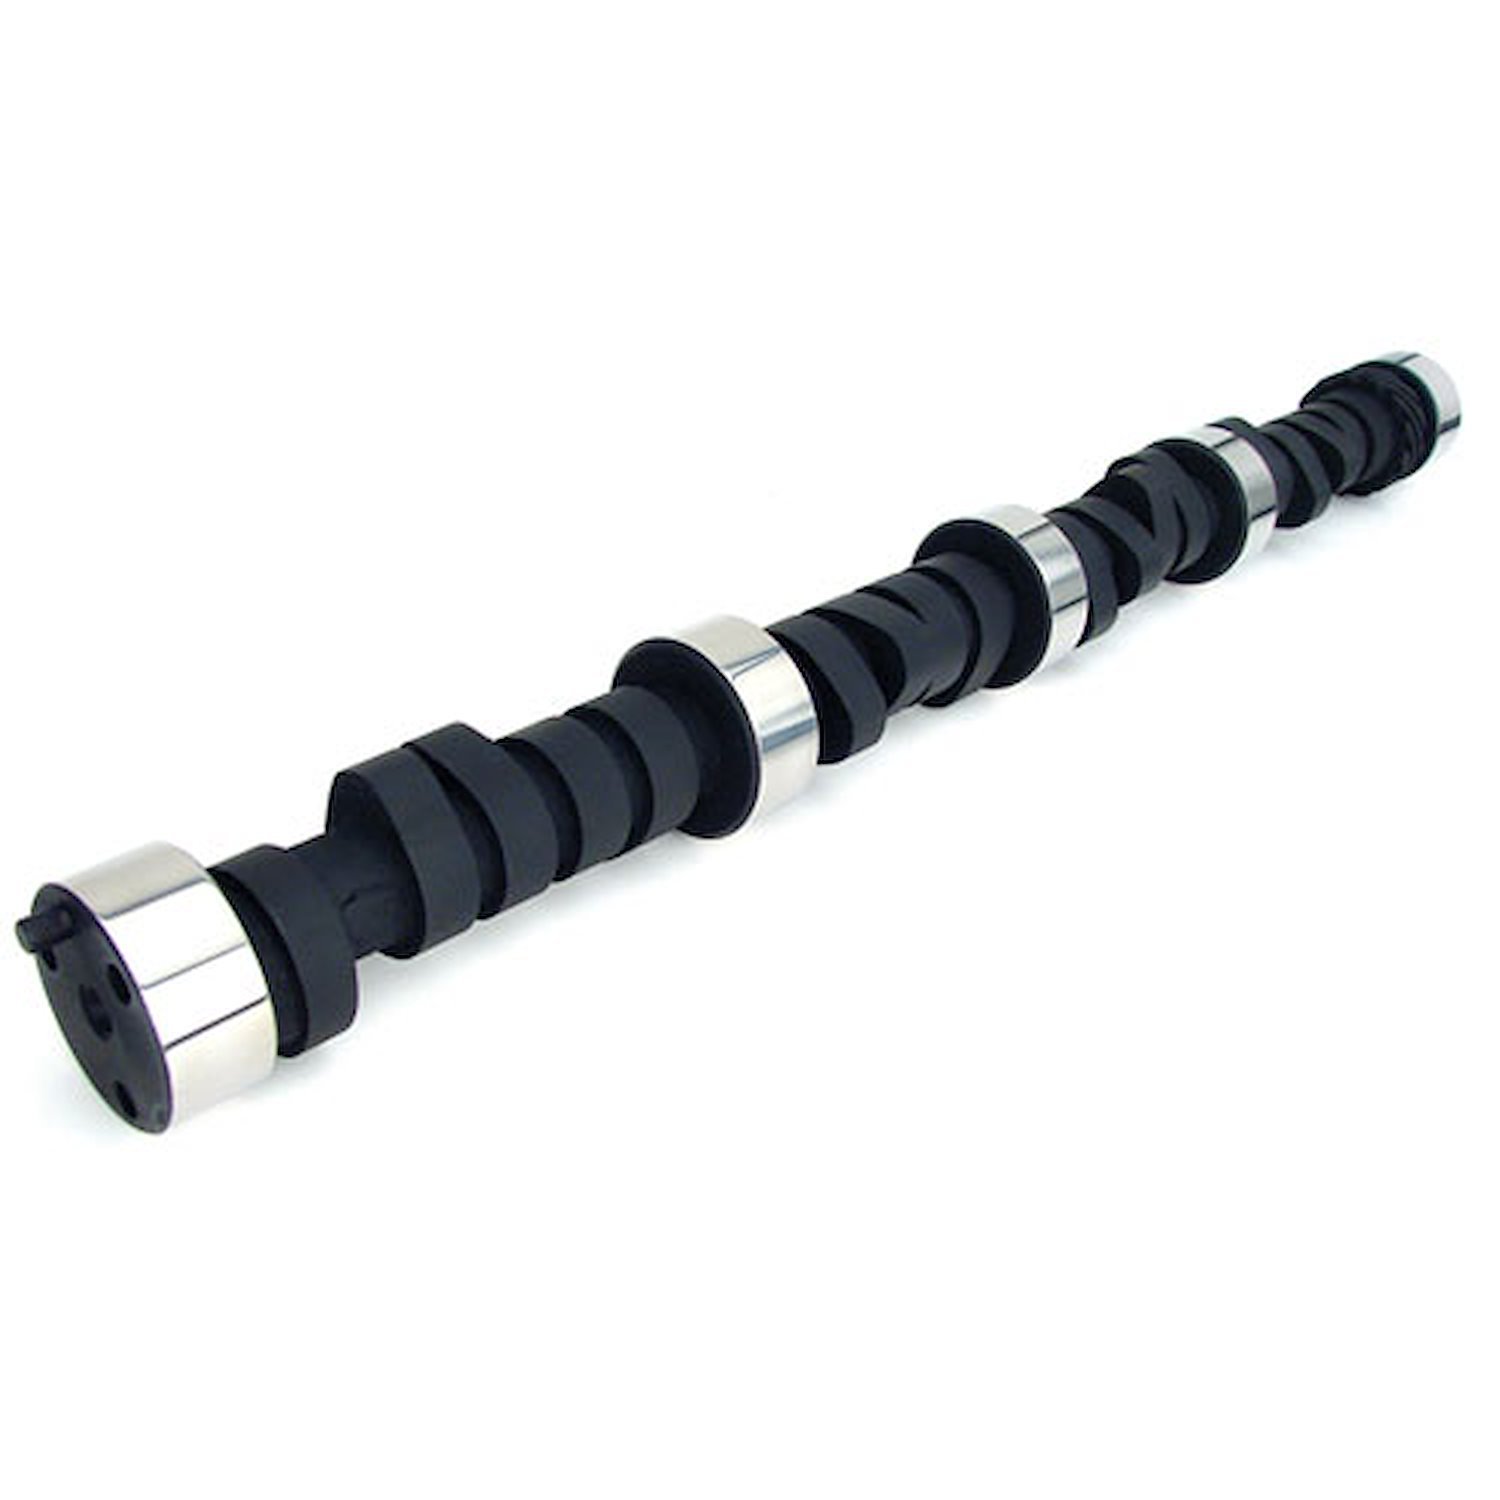 Xtreme Energy 268H Hydraulic Flat Tappet Camshaft Only Lift: .515" /.520" Duration: 268°/280° RPM Range: 1600-5800